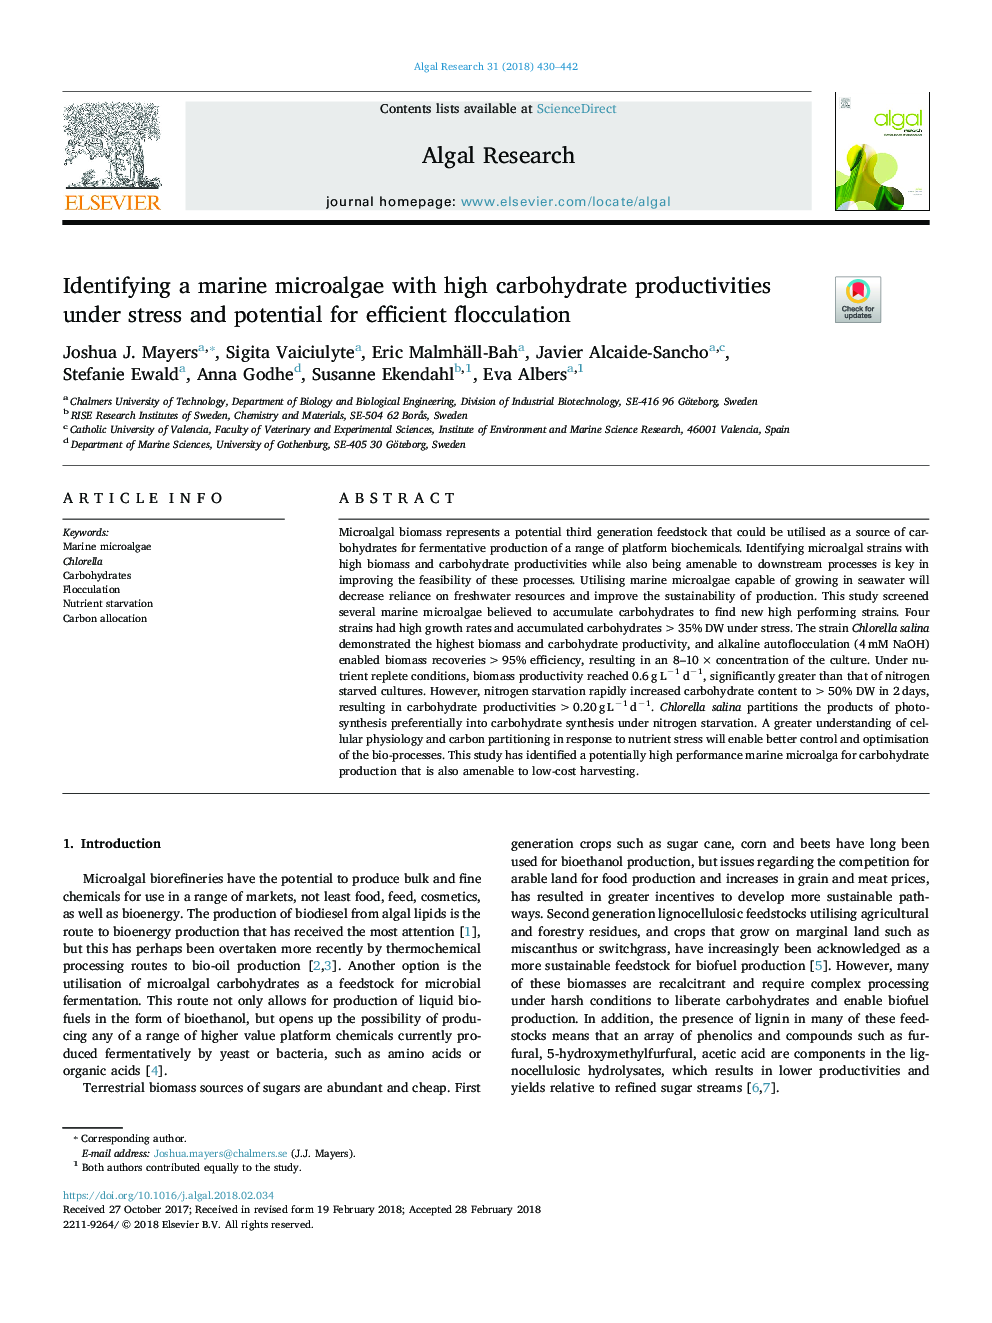 Identifying a marine microalgae with high carbohydrate productivities under stress and potential for efficient flocculation